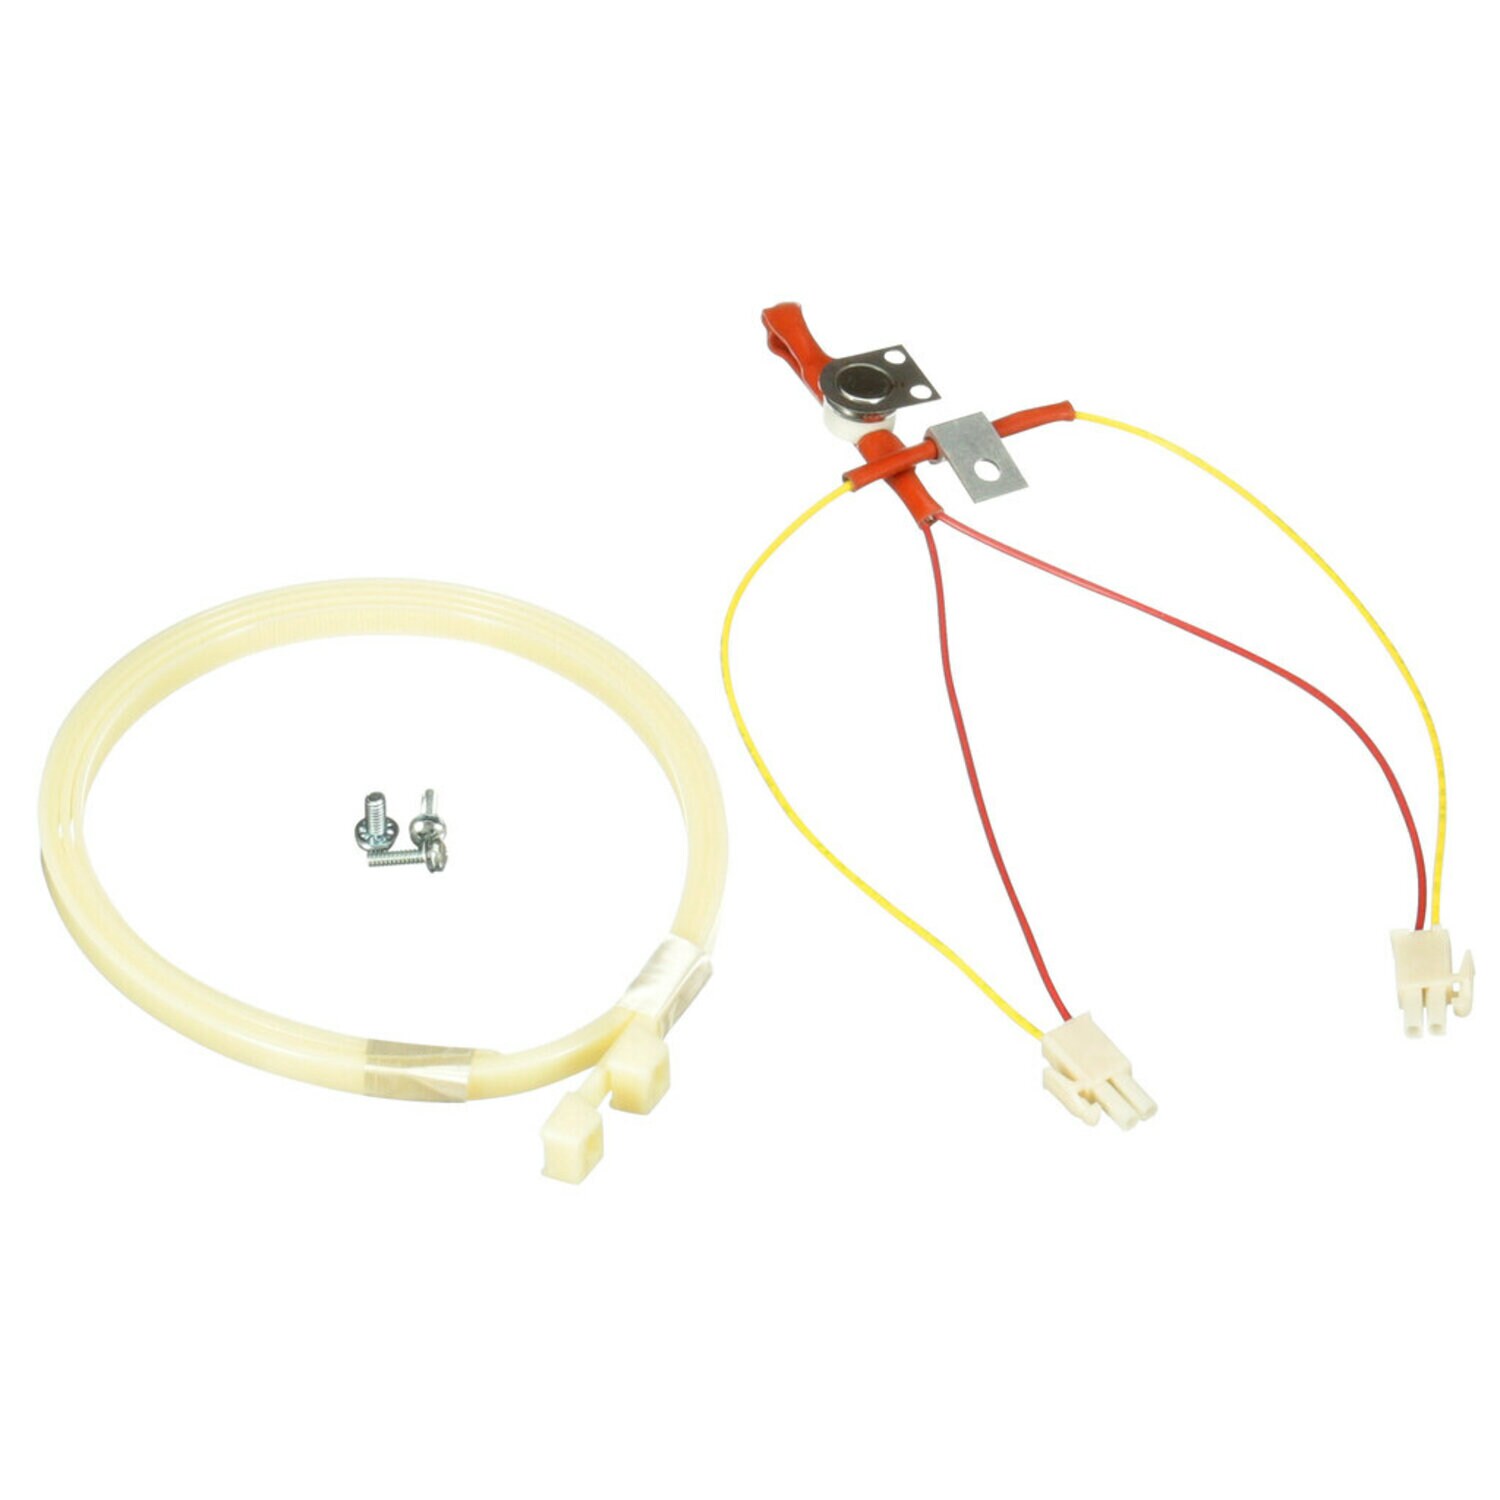 7010329954 - "3M Scotch-Weld PUR Easy 250 Preheater High Temperature
Thermostat/TCO
Kit, 1/Case"